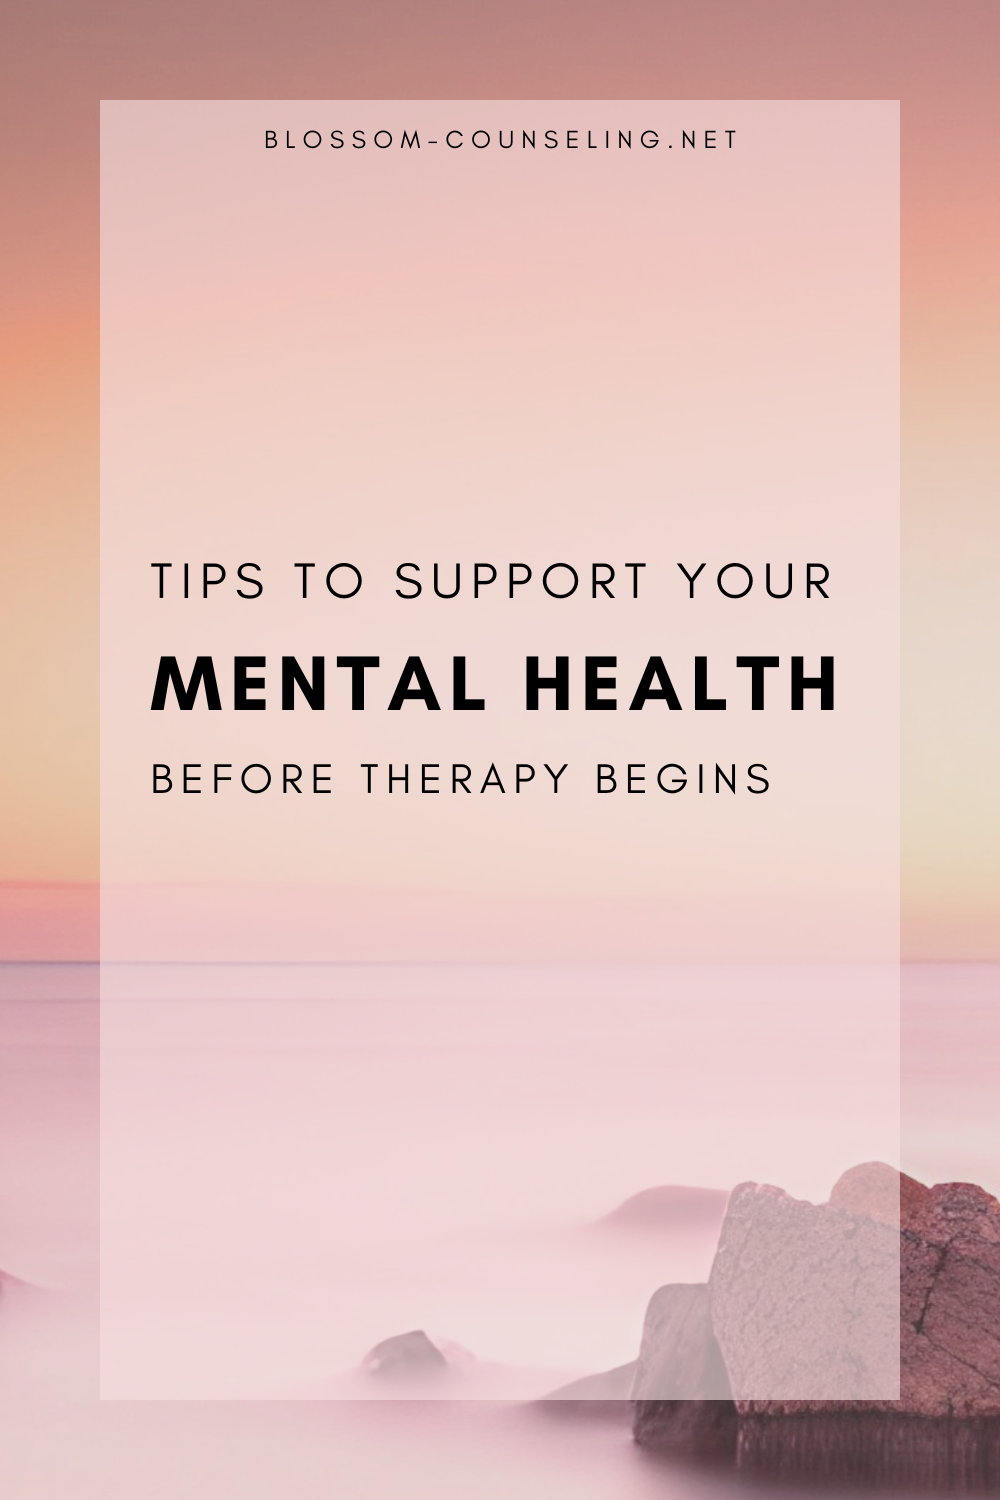 Tips to Support Your Mental Health Before Therapy Begins